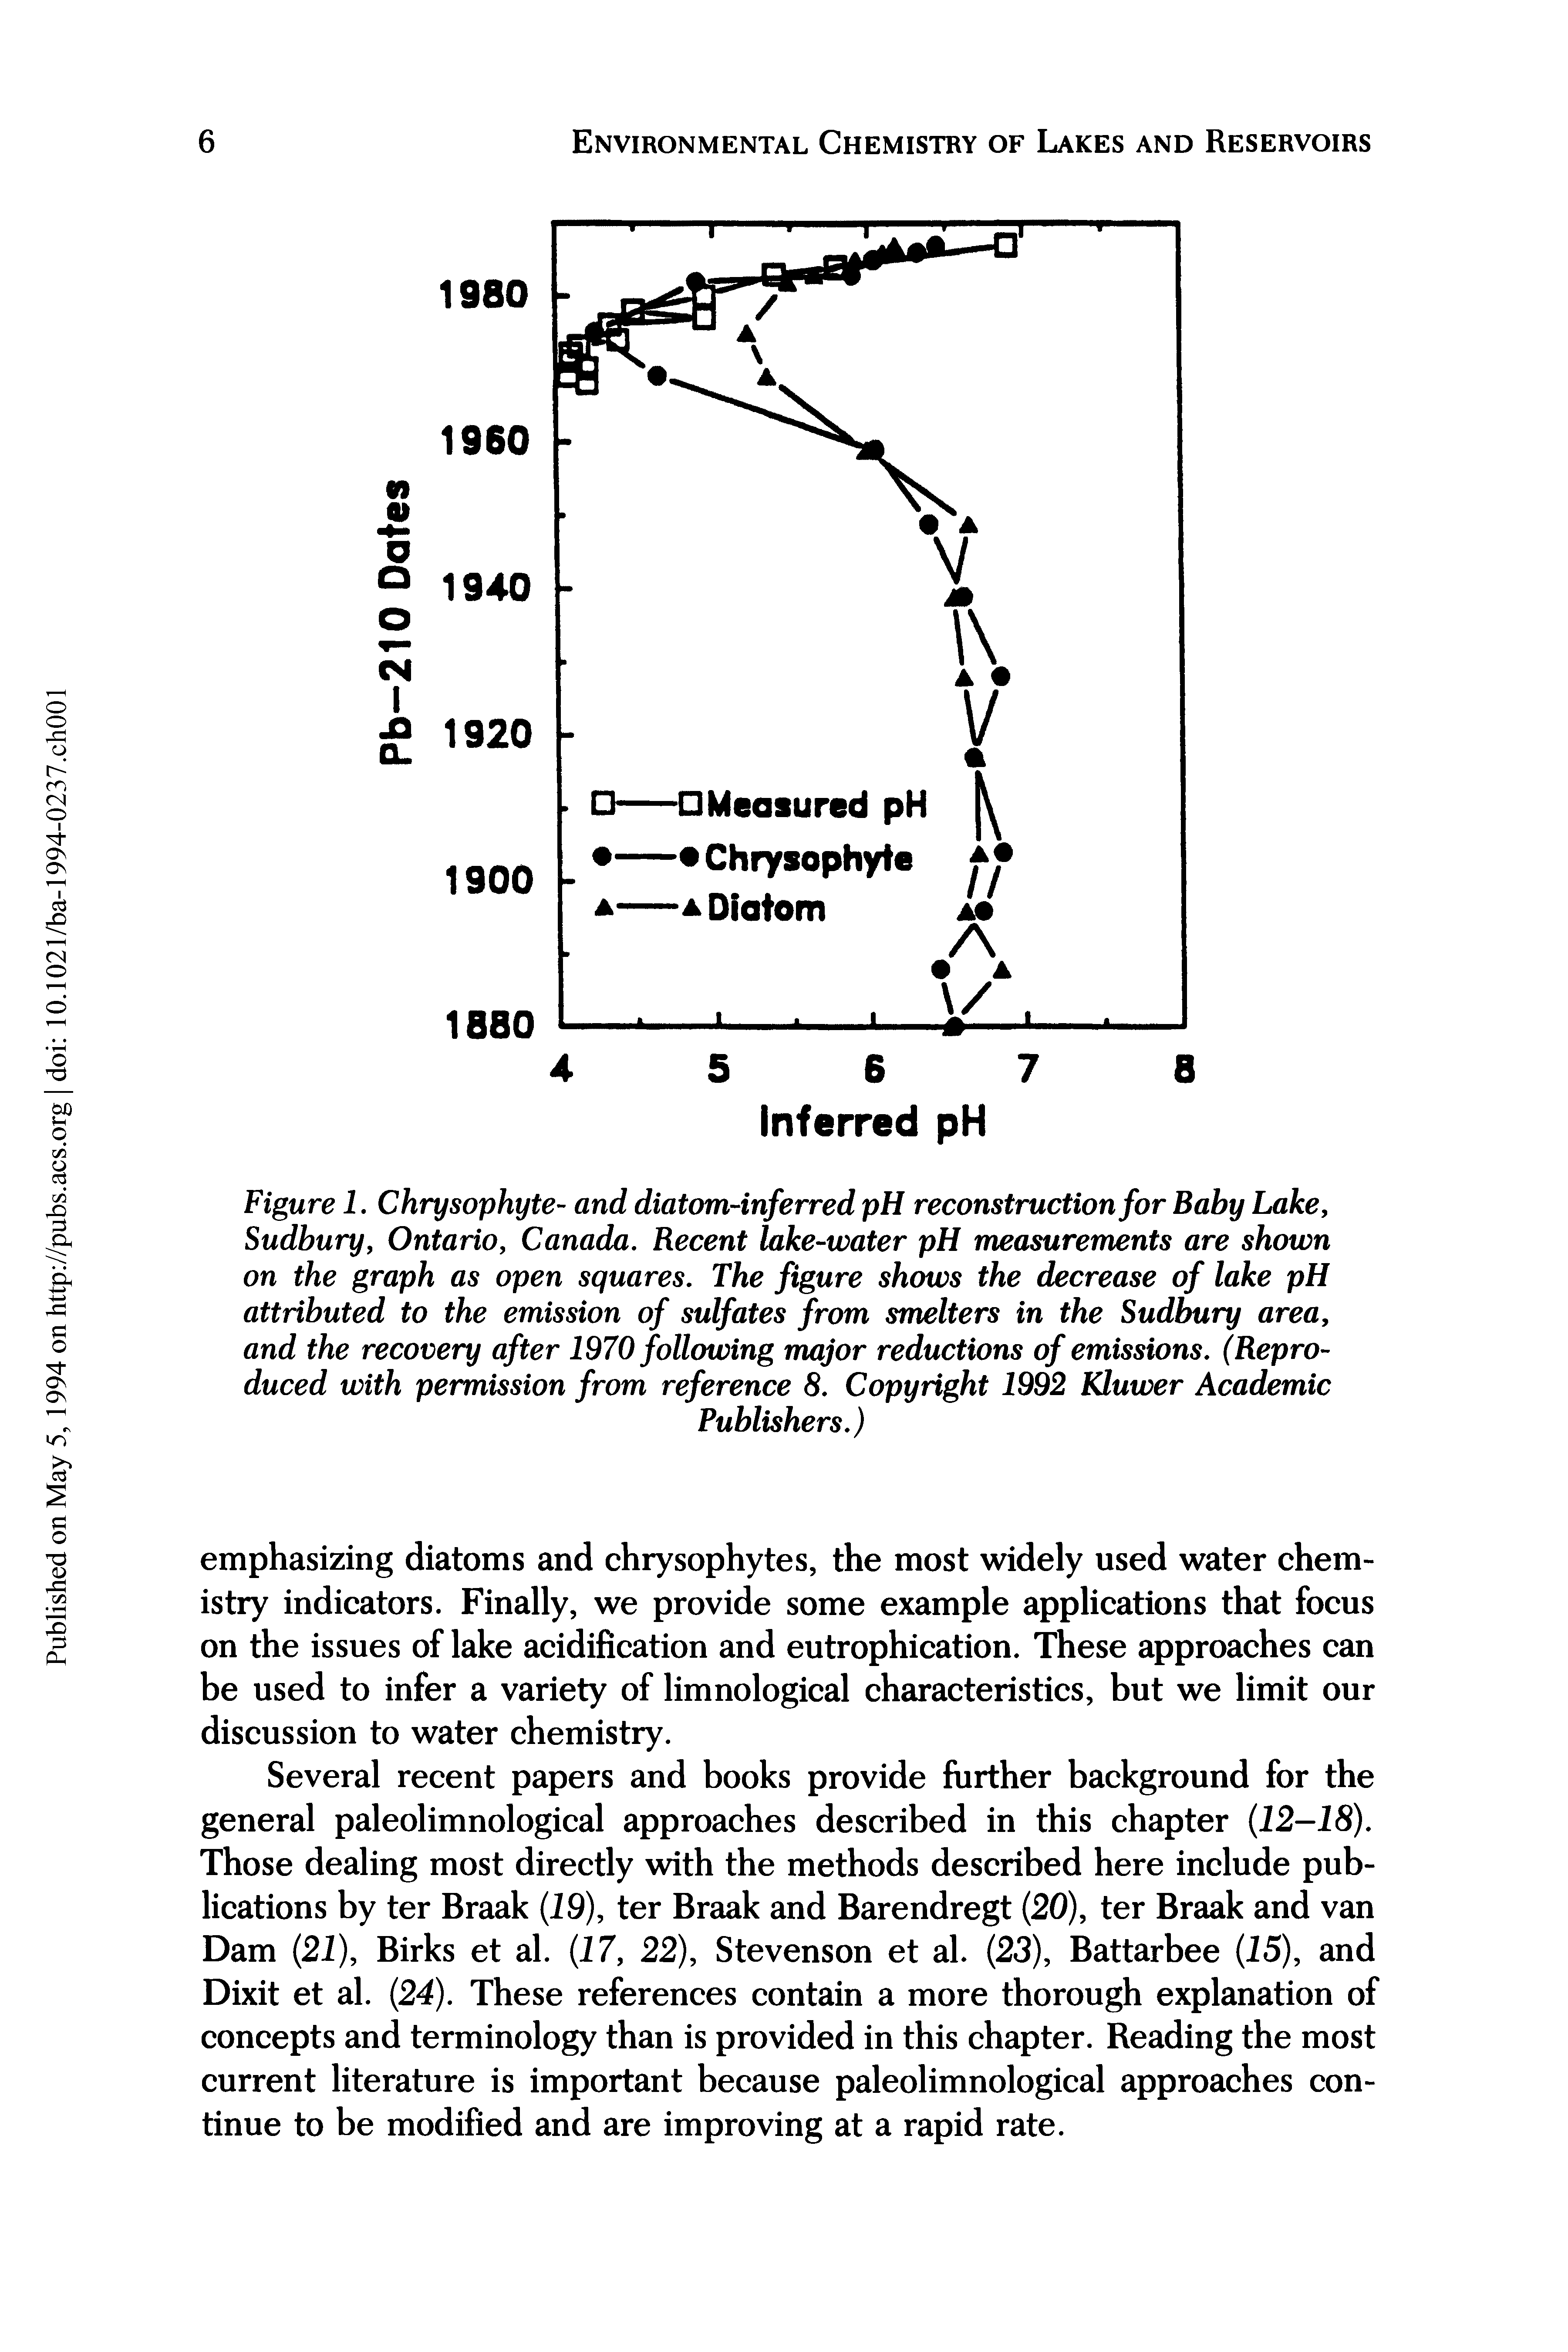 Figure 1. Chrysophyte- and diatom-inferred pH reconstruction for Baby Lake, Sudbury, Ontario, Canada. Recent lake-water pH measurements are shown on the graph as open squares. The figure shows the decrease of lake pH attributed to the emission of sulfates from smelters in the Sudbury area, and the recovery after 1970 following major reductions of emissions. (Reproduced with permission from reference 8. Copyright 1992 Kluwer Academic...